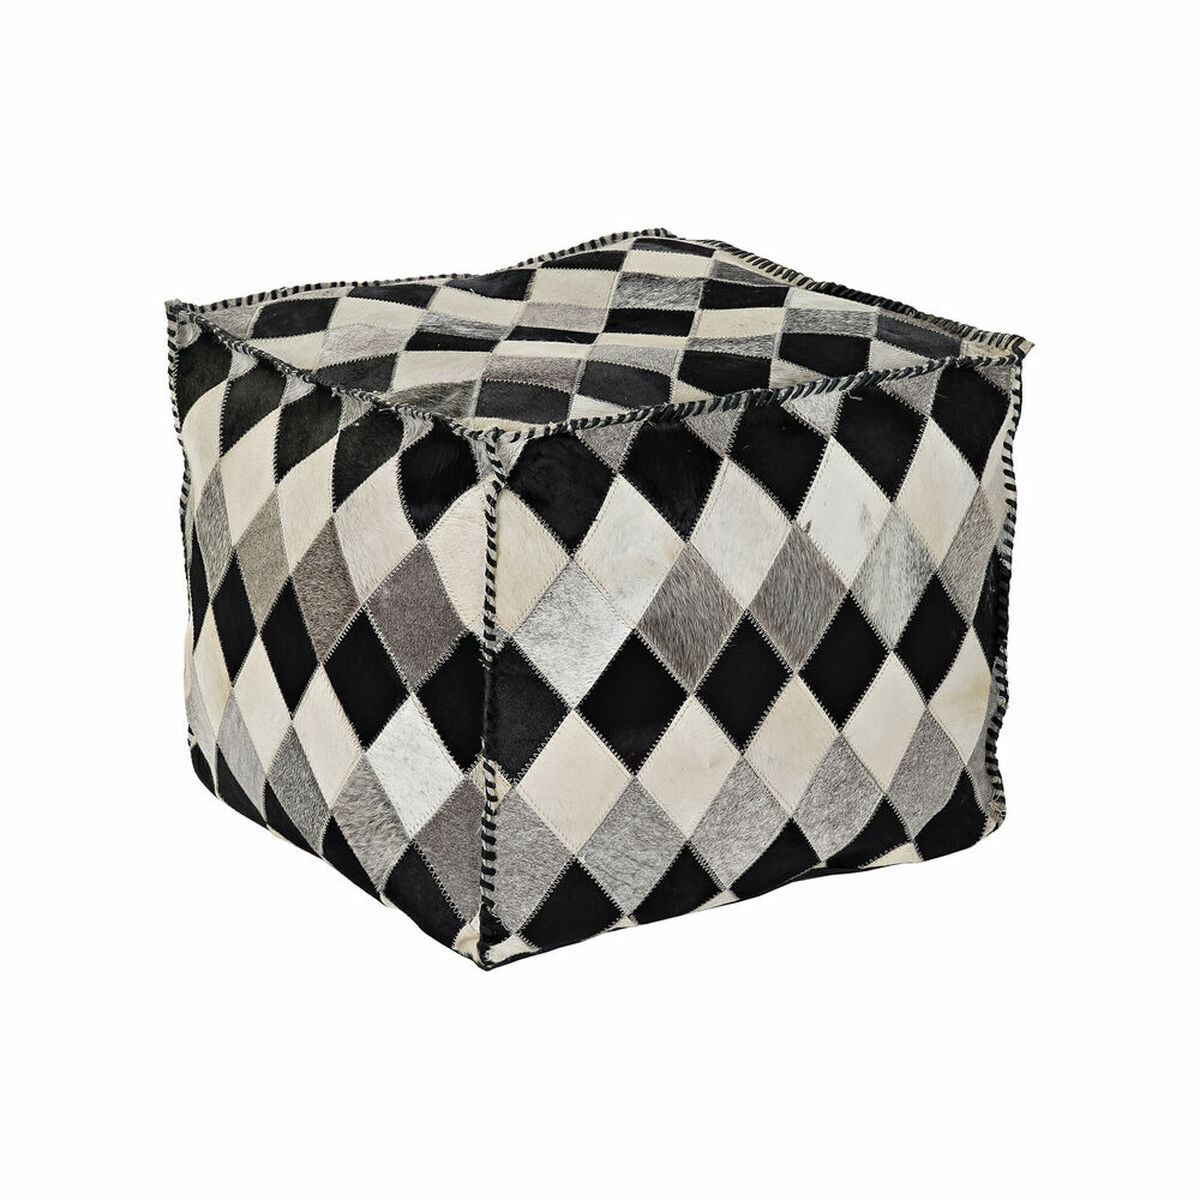 Pouffe DKD Home Decor Polyester Leather (45 x 45 x 40 cm)